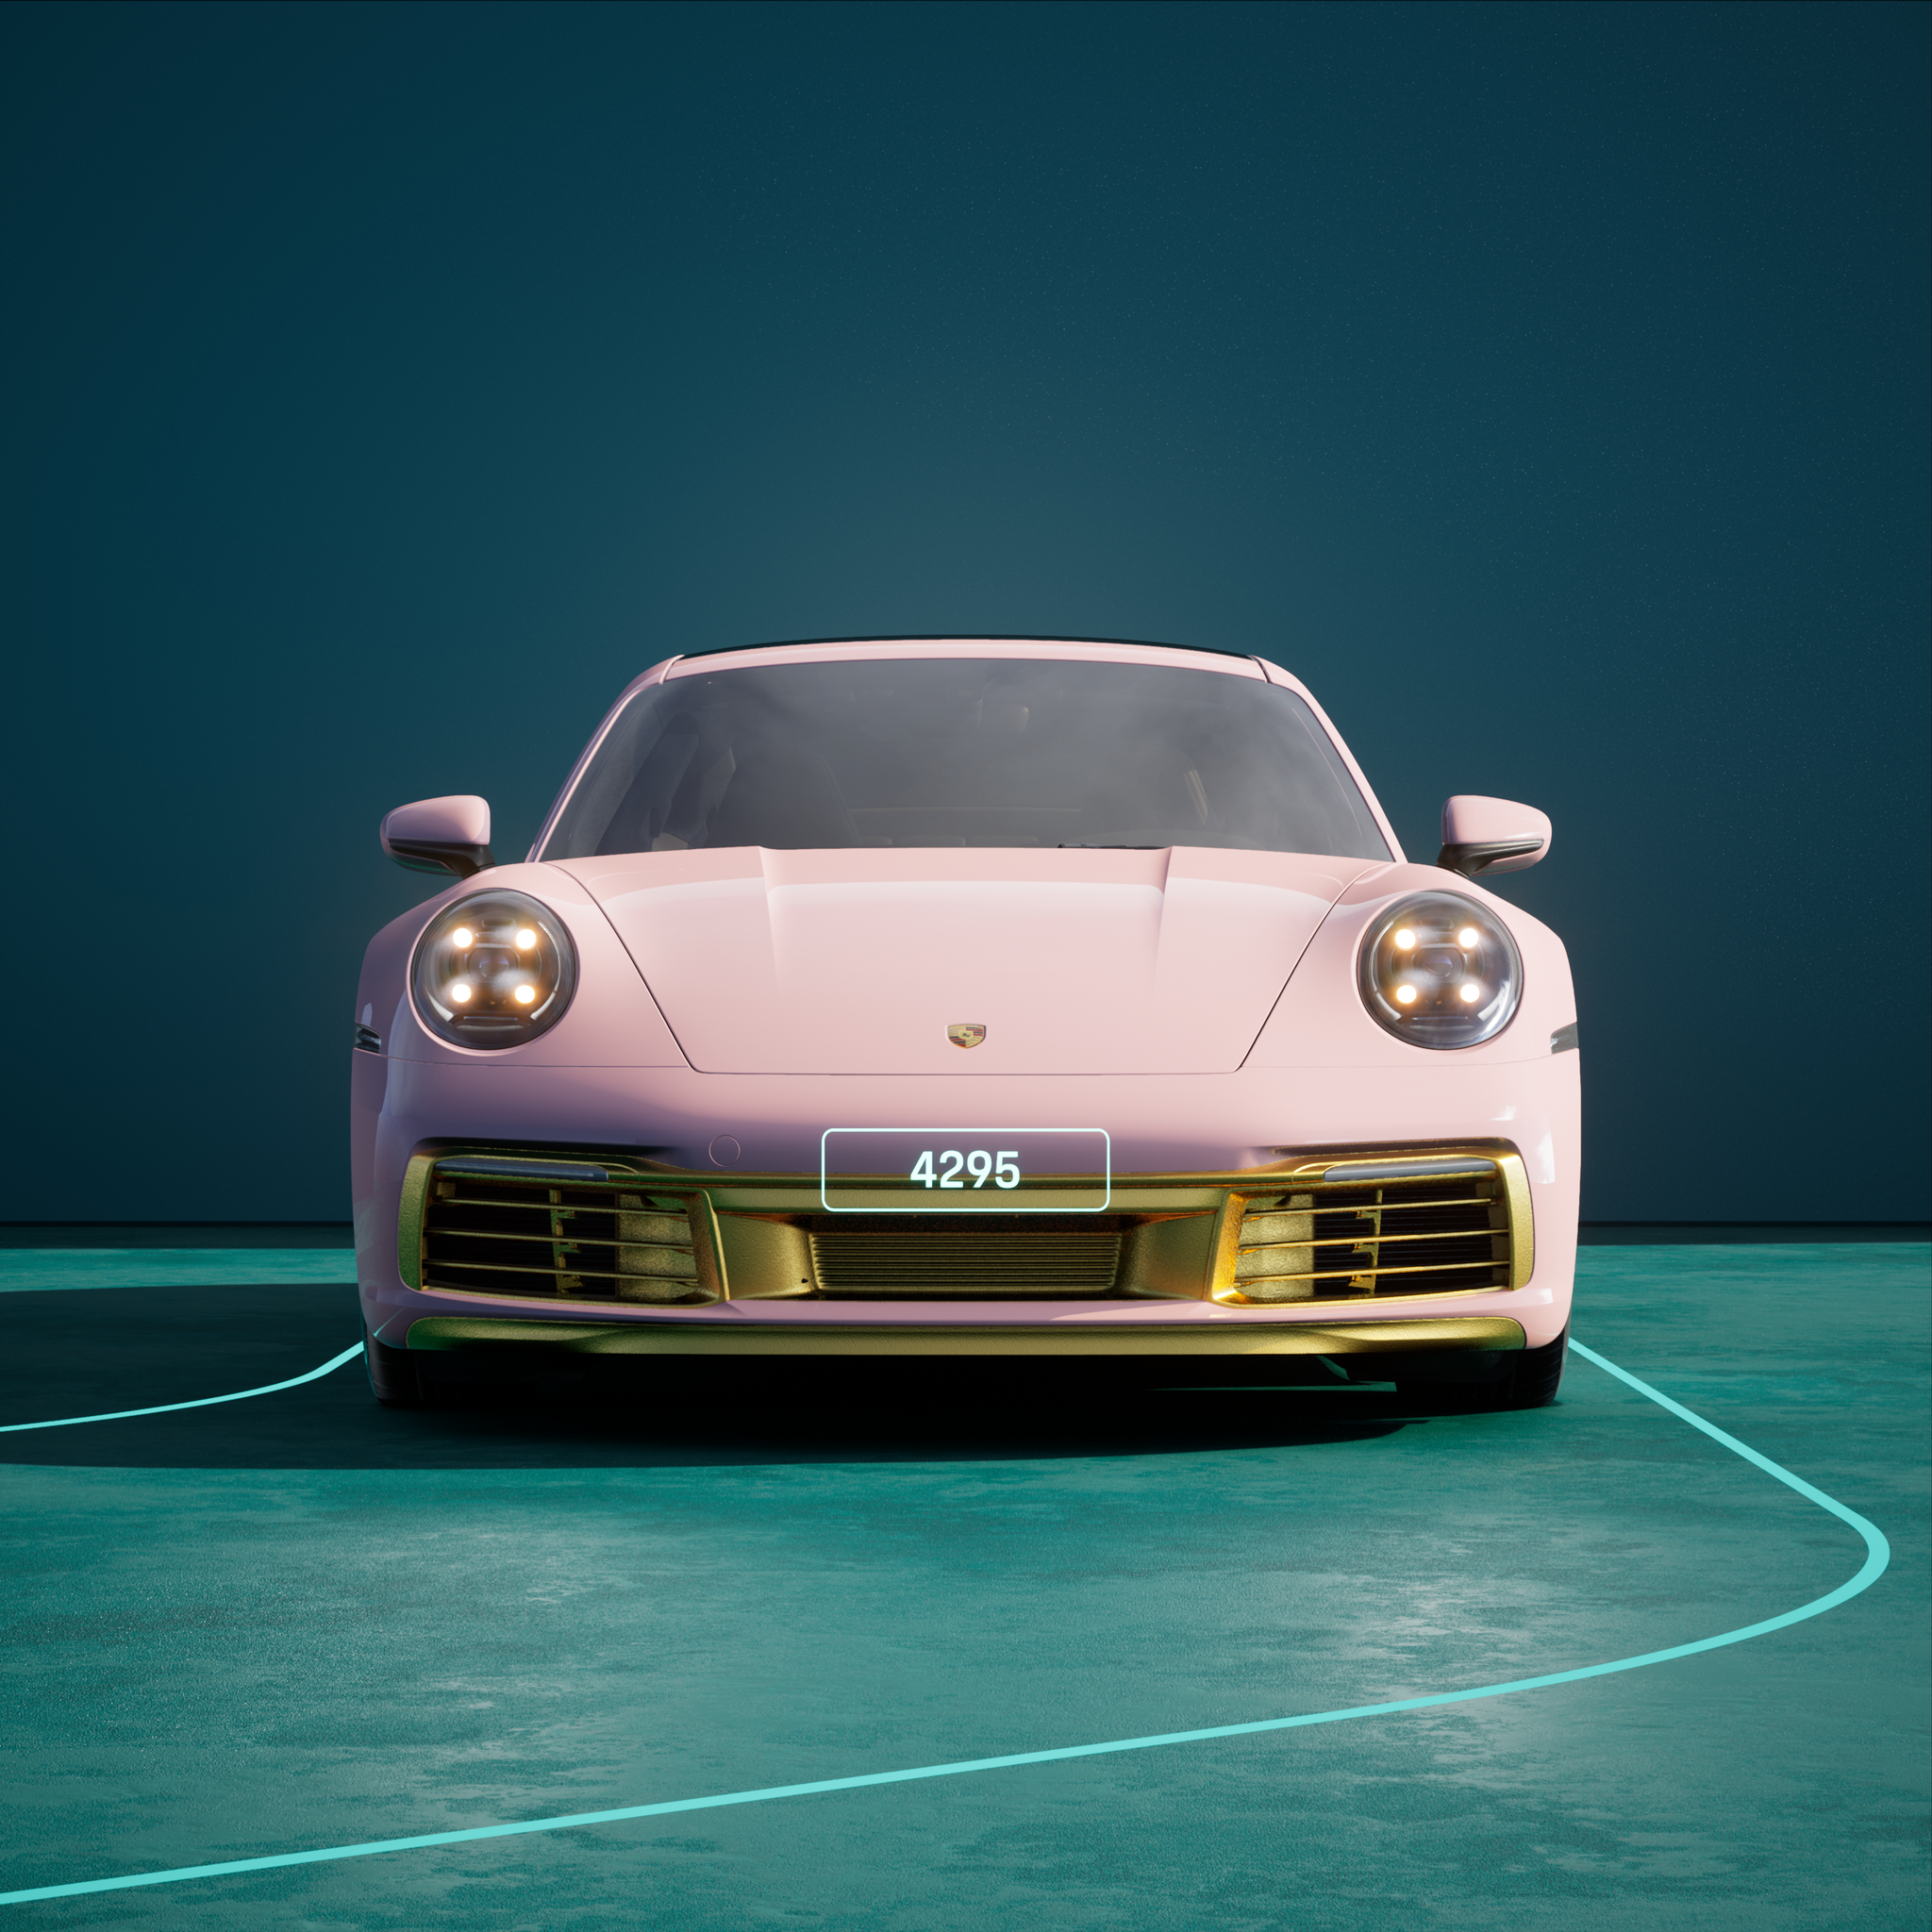 The PORSCHΞ 911 4295 image in phase